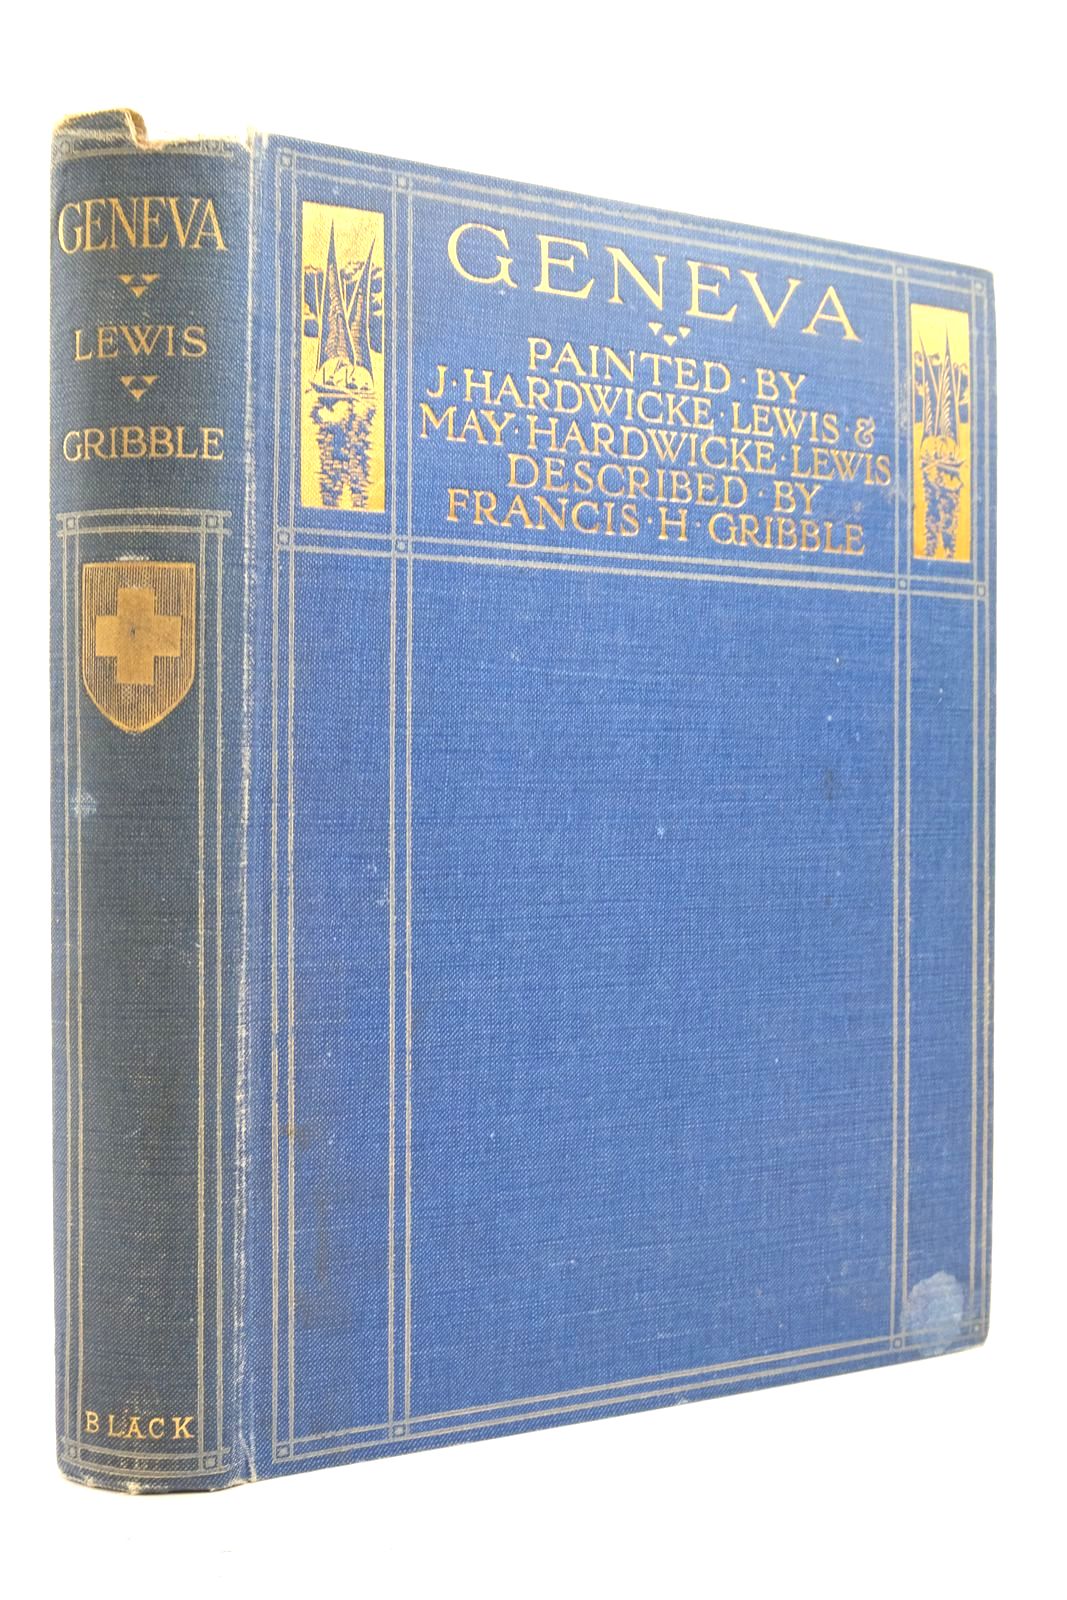 Photo of GENEVA written by Gribble, Francis illustrated by Lewis, J. Hardwicke Lewis, May Hardwicke published by Adam &amp; Charles Black (STOCK CODE: 2137579)  for sale by Stella & Rose's Books